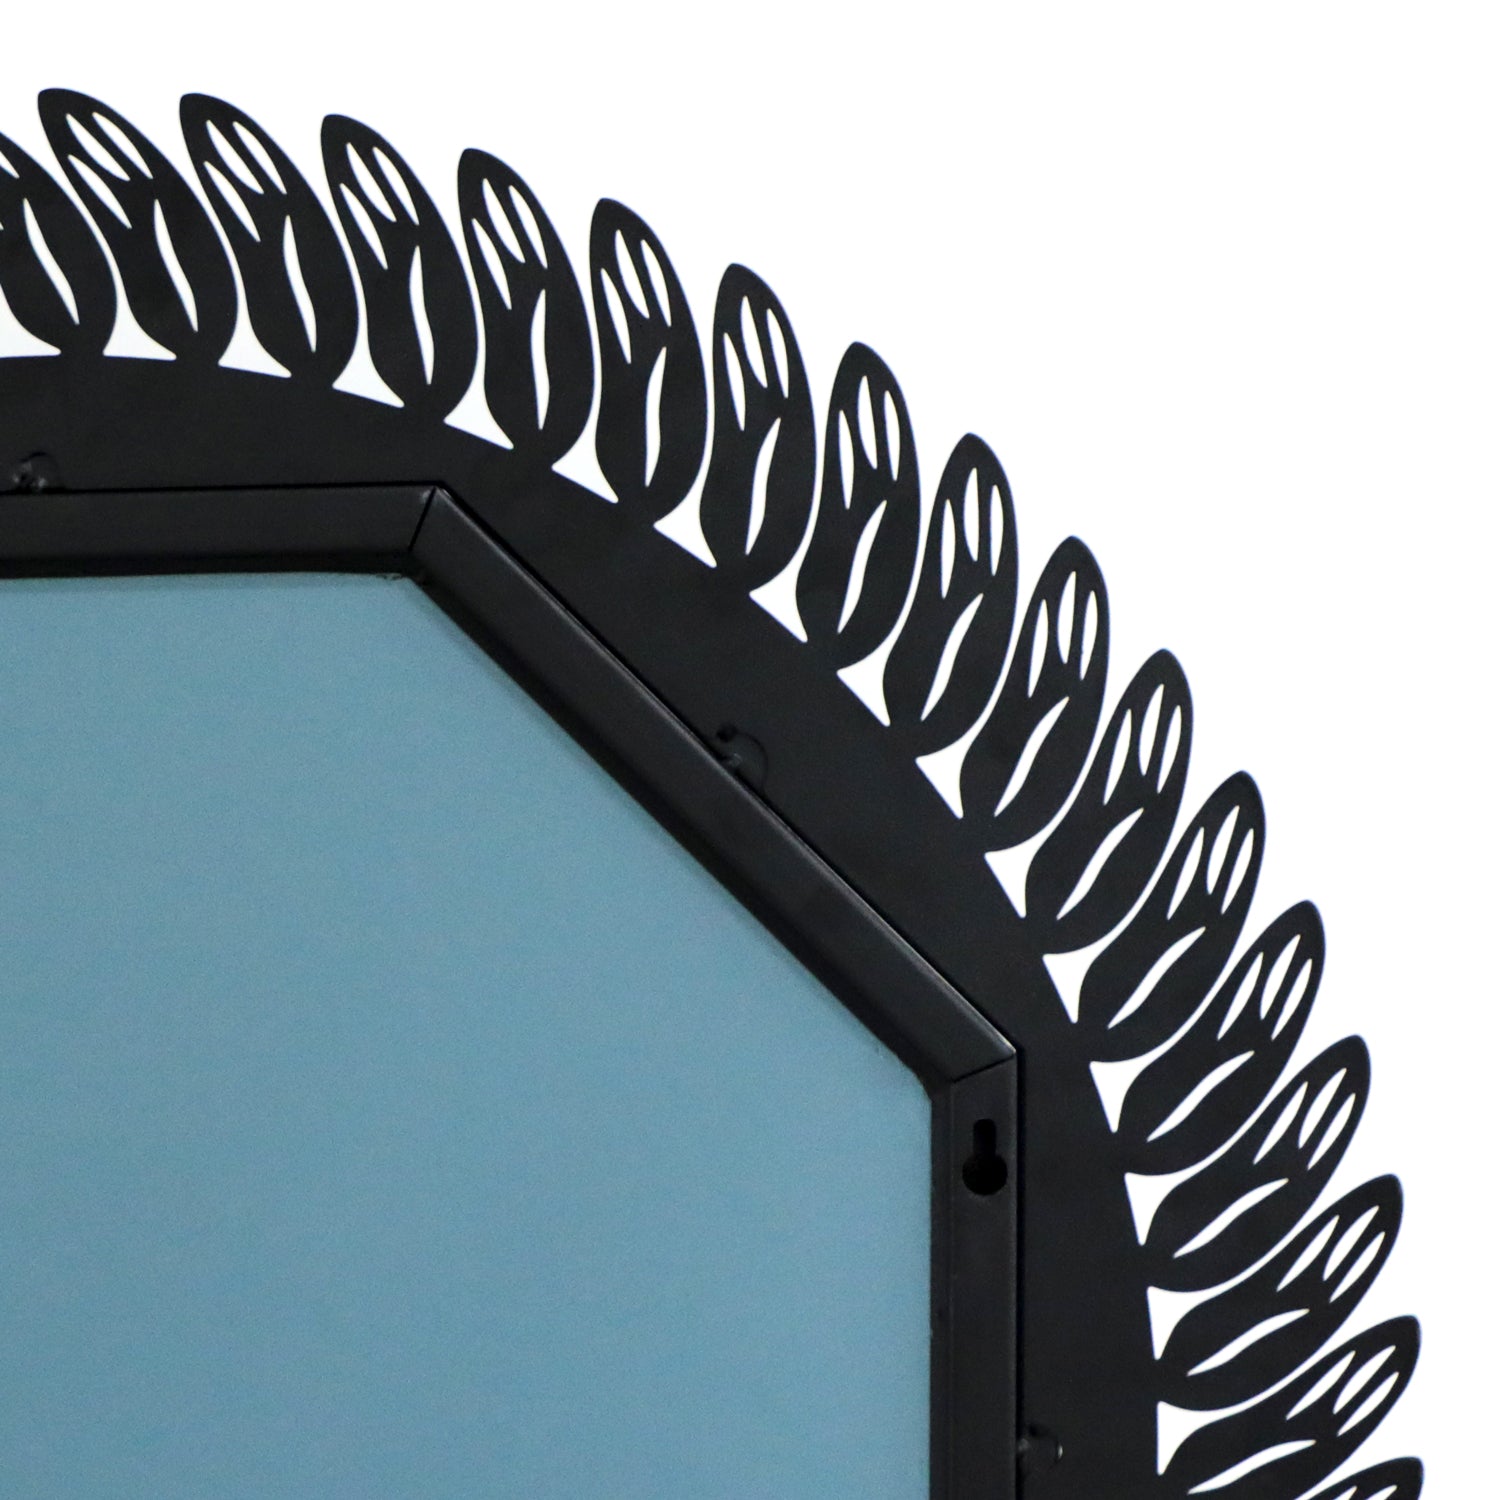 24"x24" Black Decorative Wall Mirror for Home, Octagonal Geometric Mirror with Metal Frame,Modern Hanging Mirrors for Living Room,Bedroom Entryway